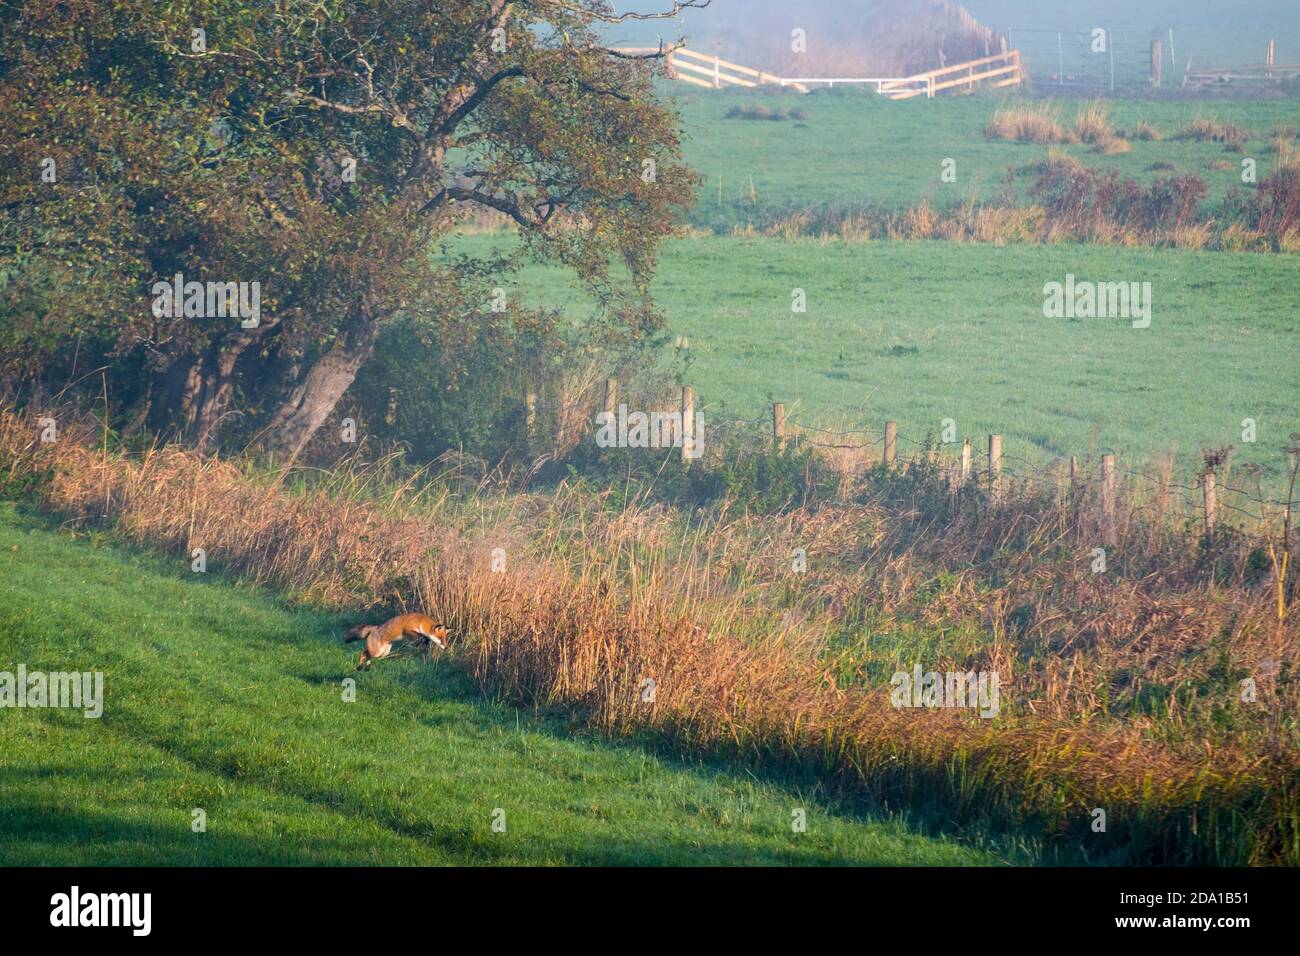 A fox hunting in an autumn morning in The  Waveney Valley near Diss, Norfolk, UK. Stock Photo